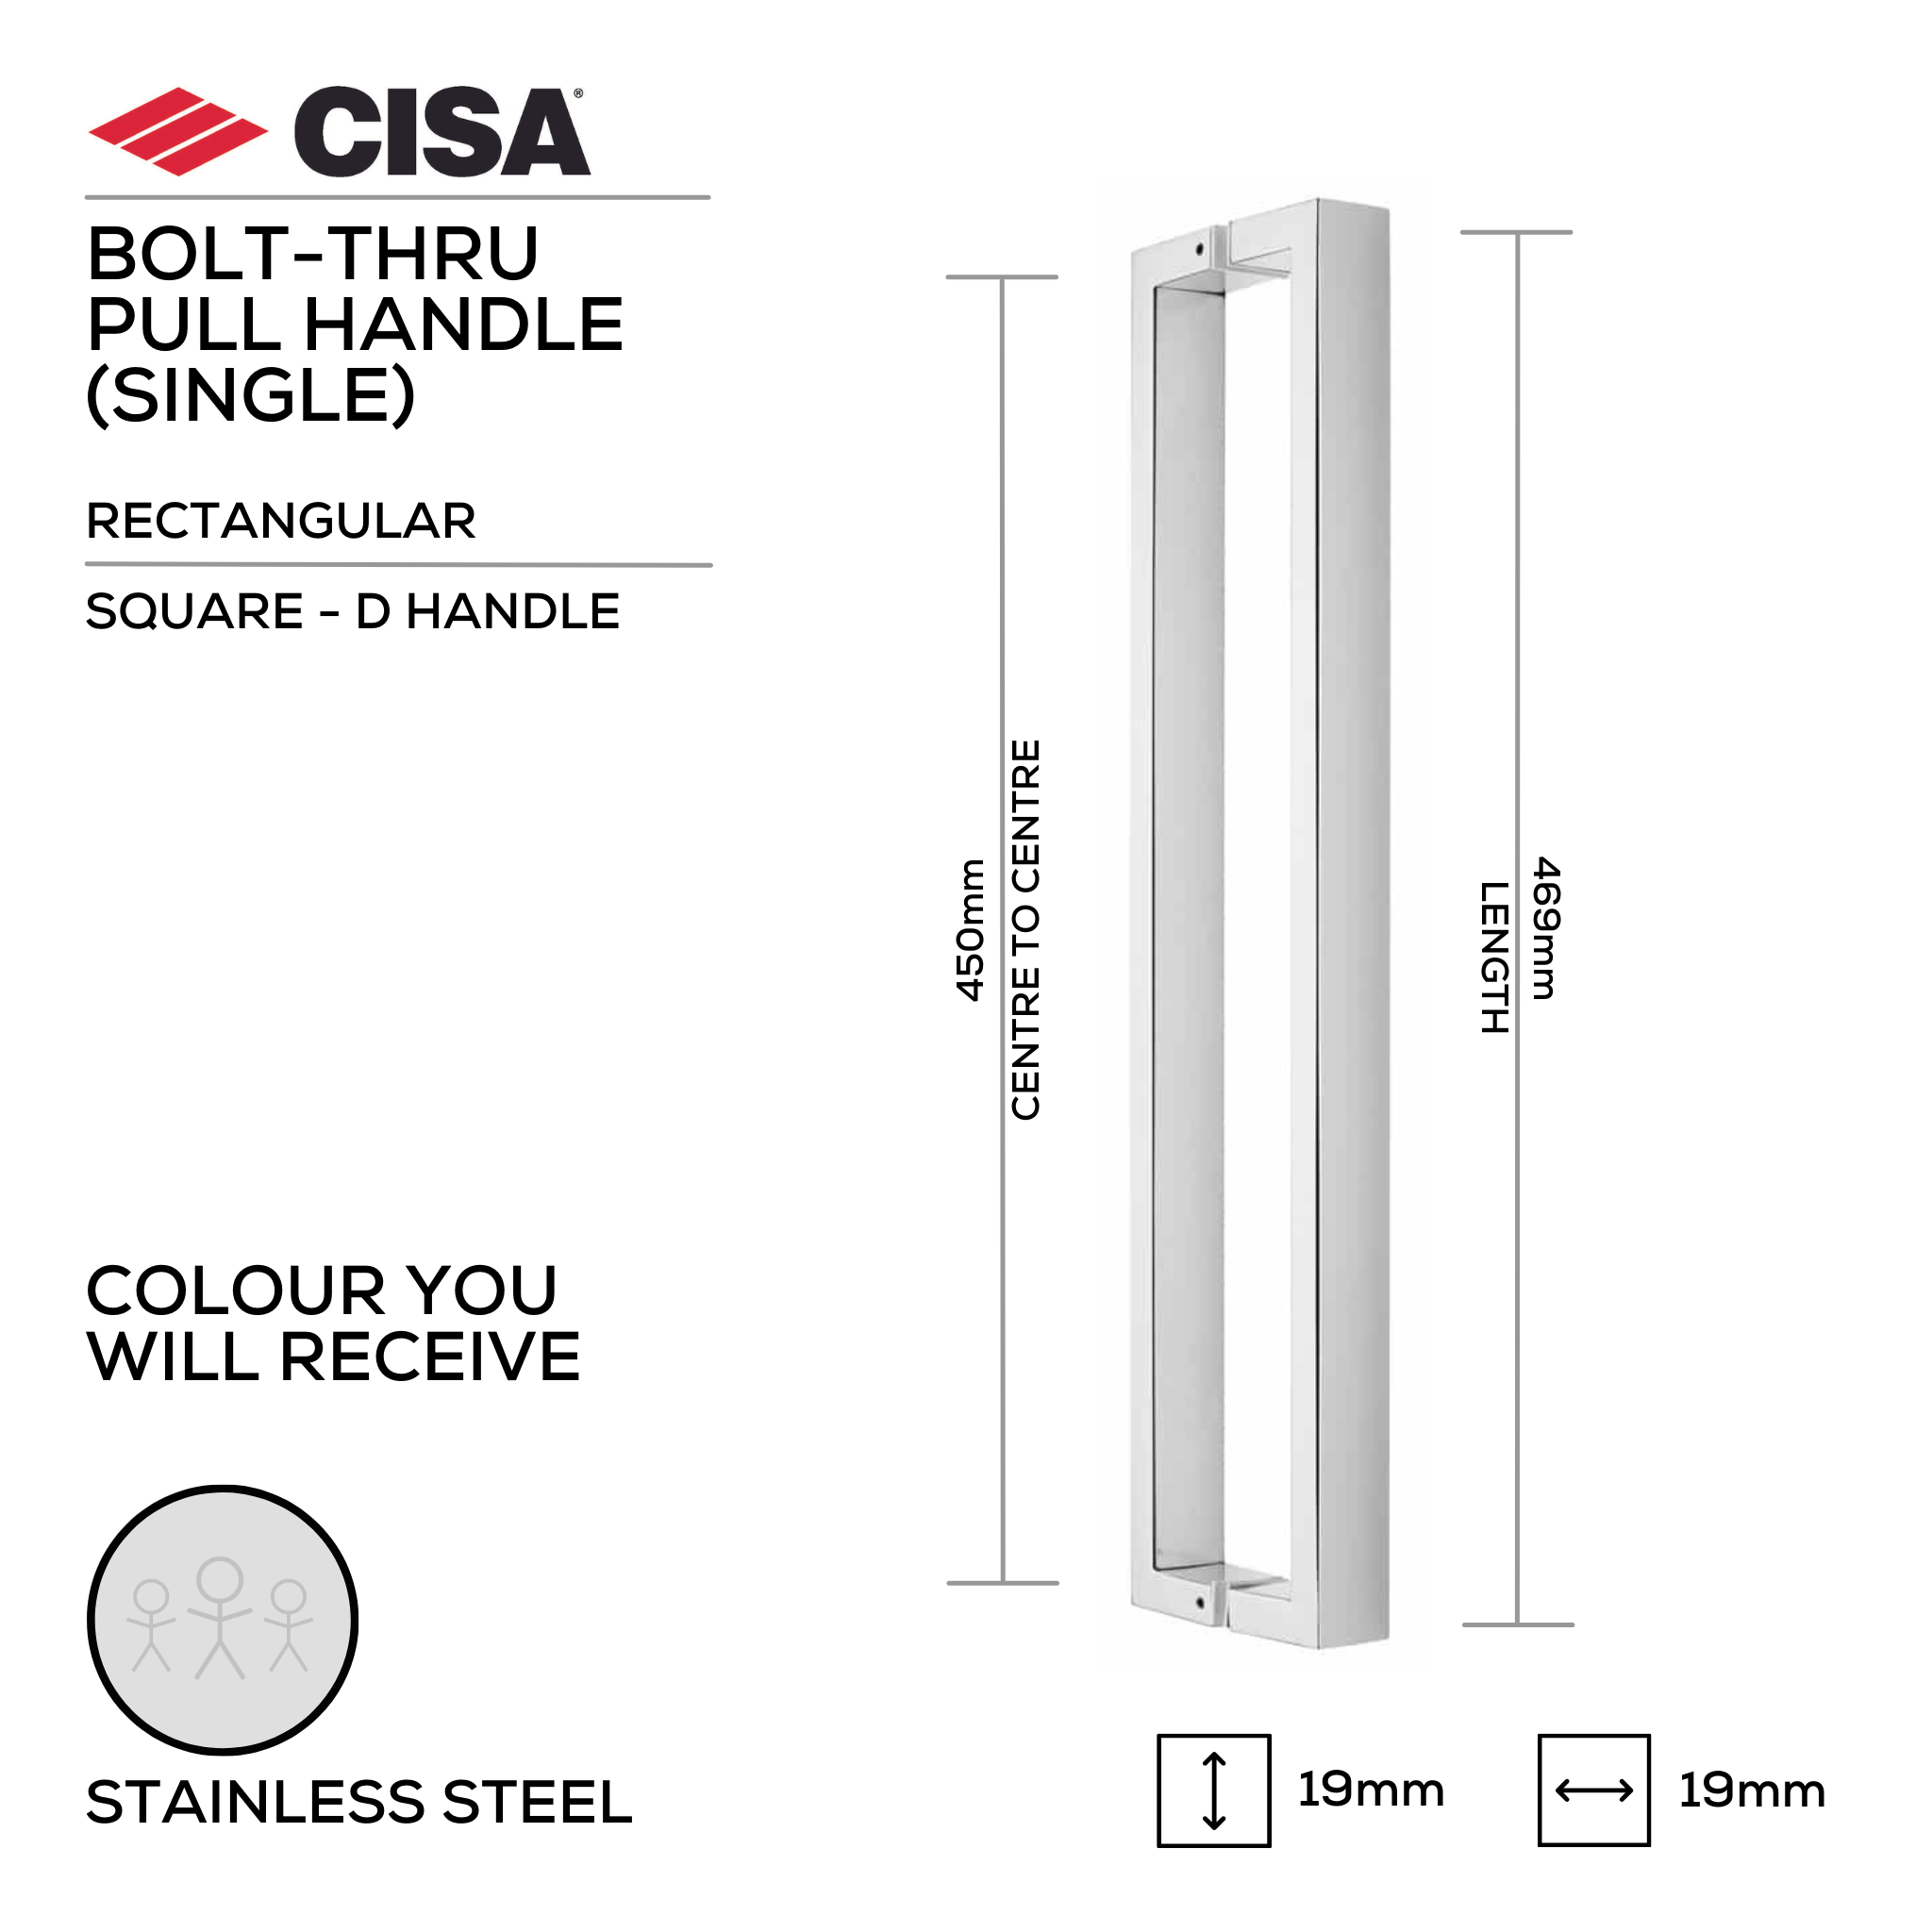 FP.SD03.BTF.SS, Pull Handle, Square, D Handle, BoltThru, 19mm (d) x 469mm (l) x 450mm (ctc), Stainless Steel, CISA